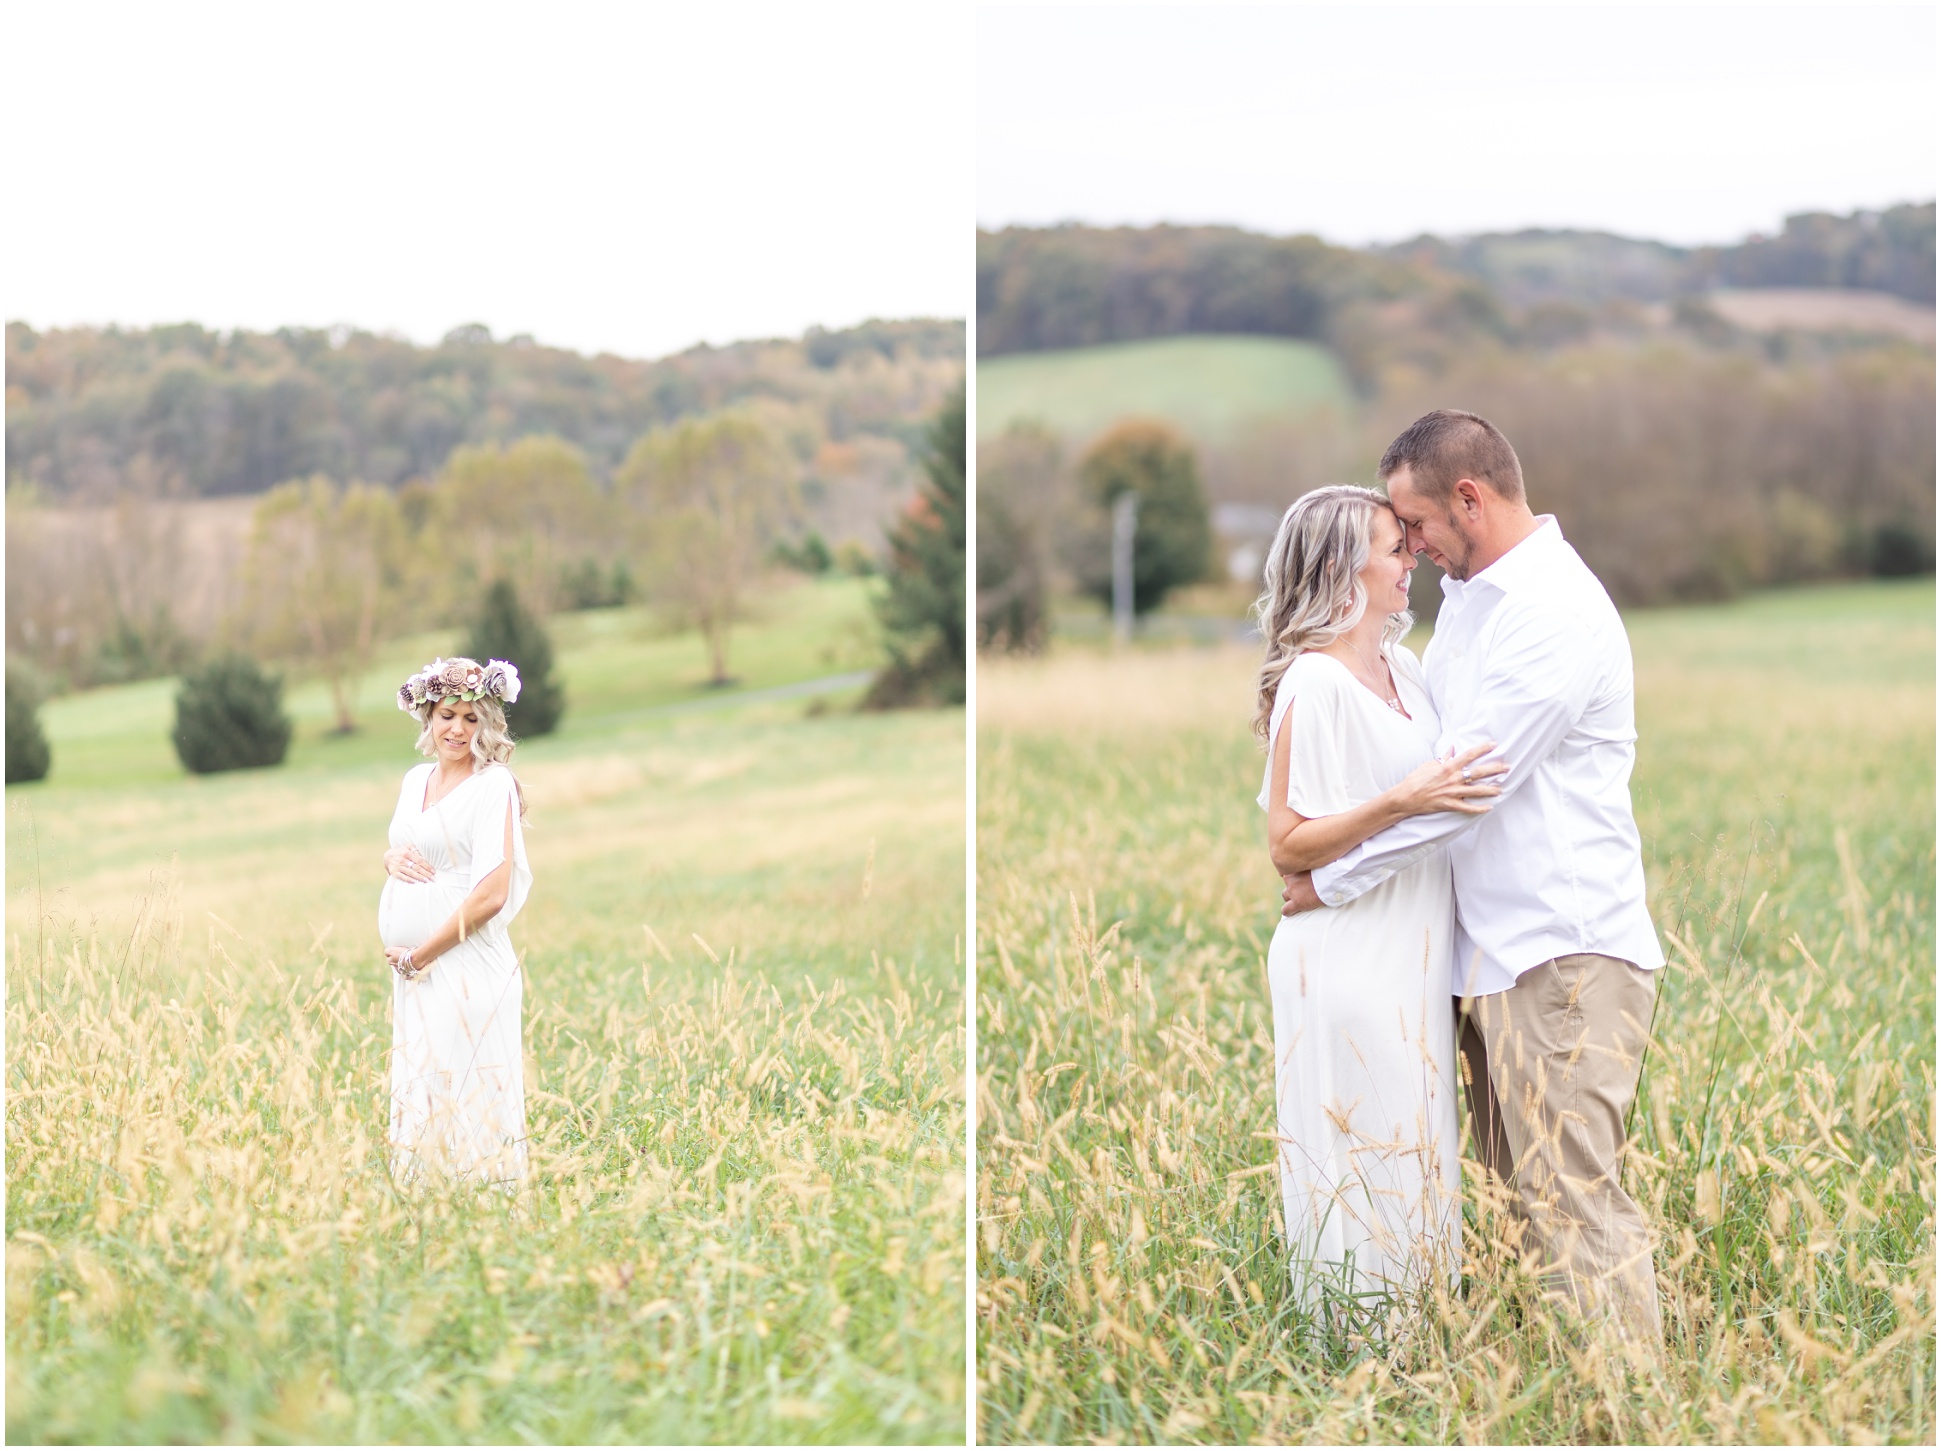 Two images of mom and dad-to-be during their maternity session.